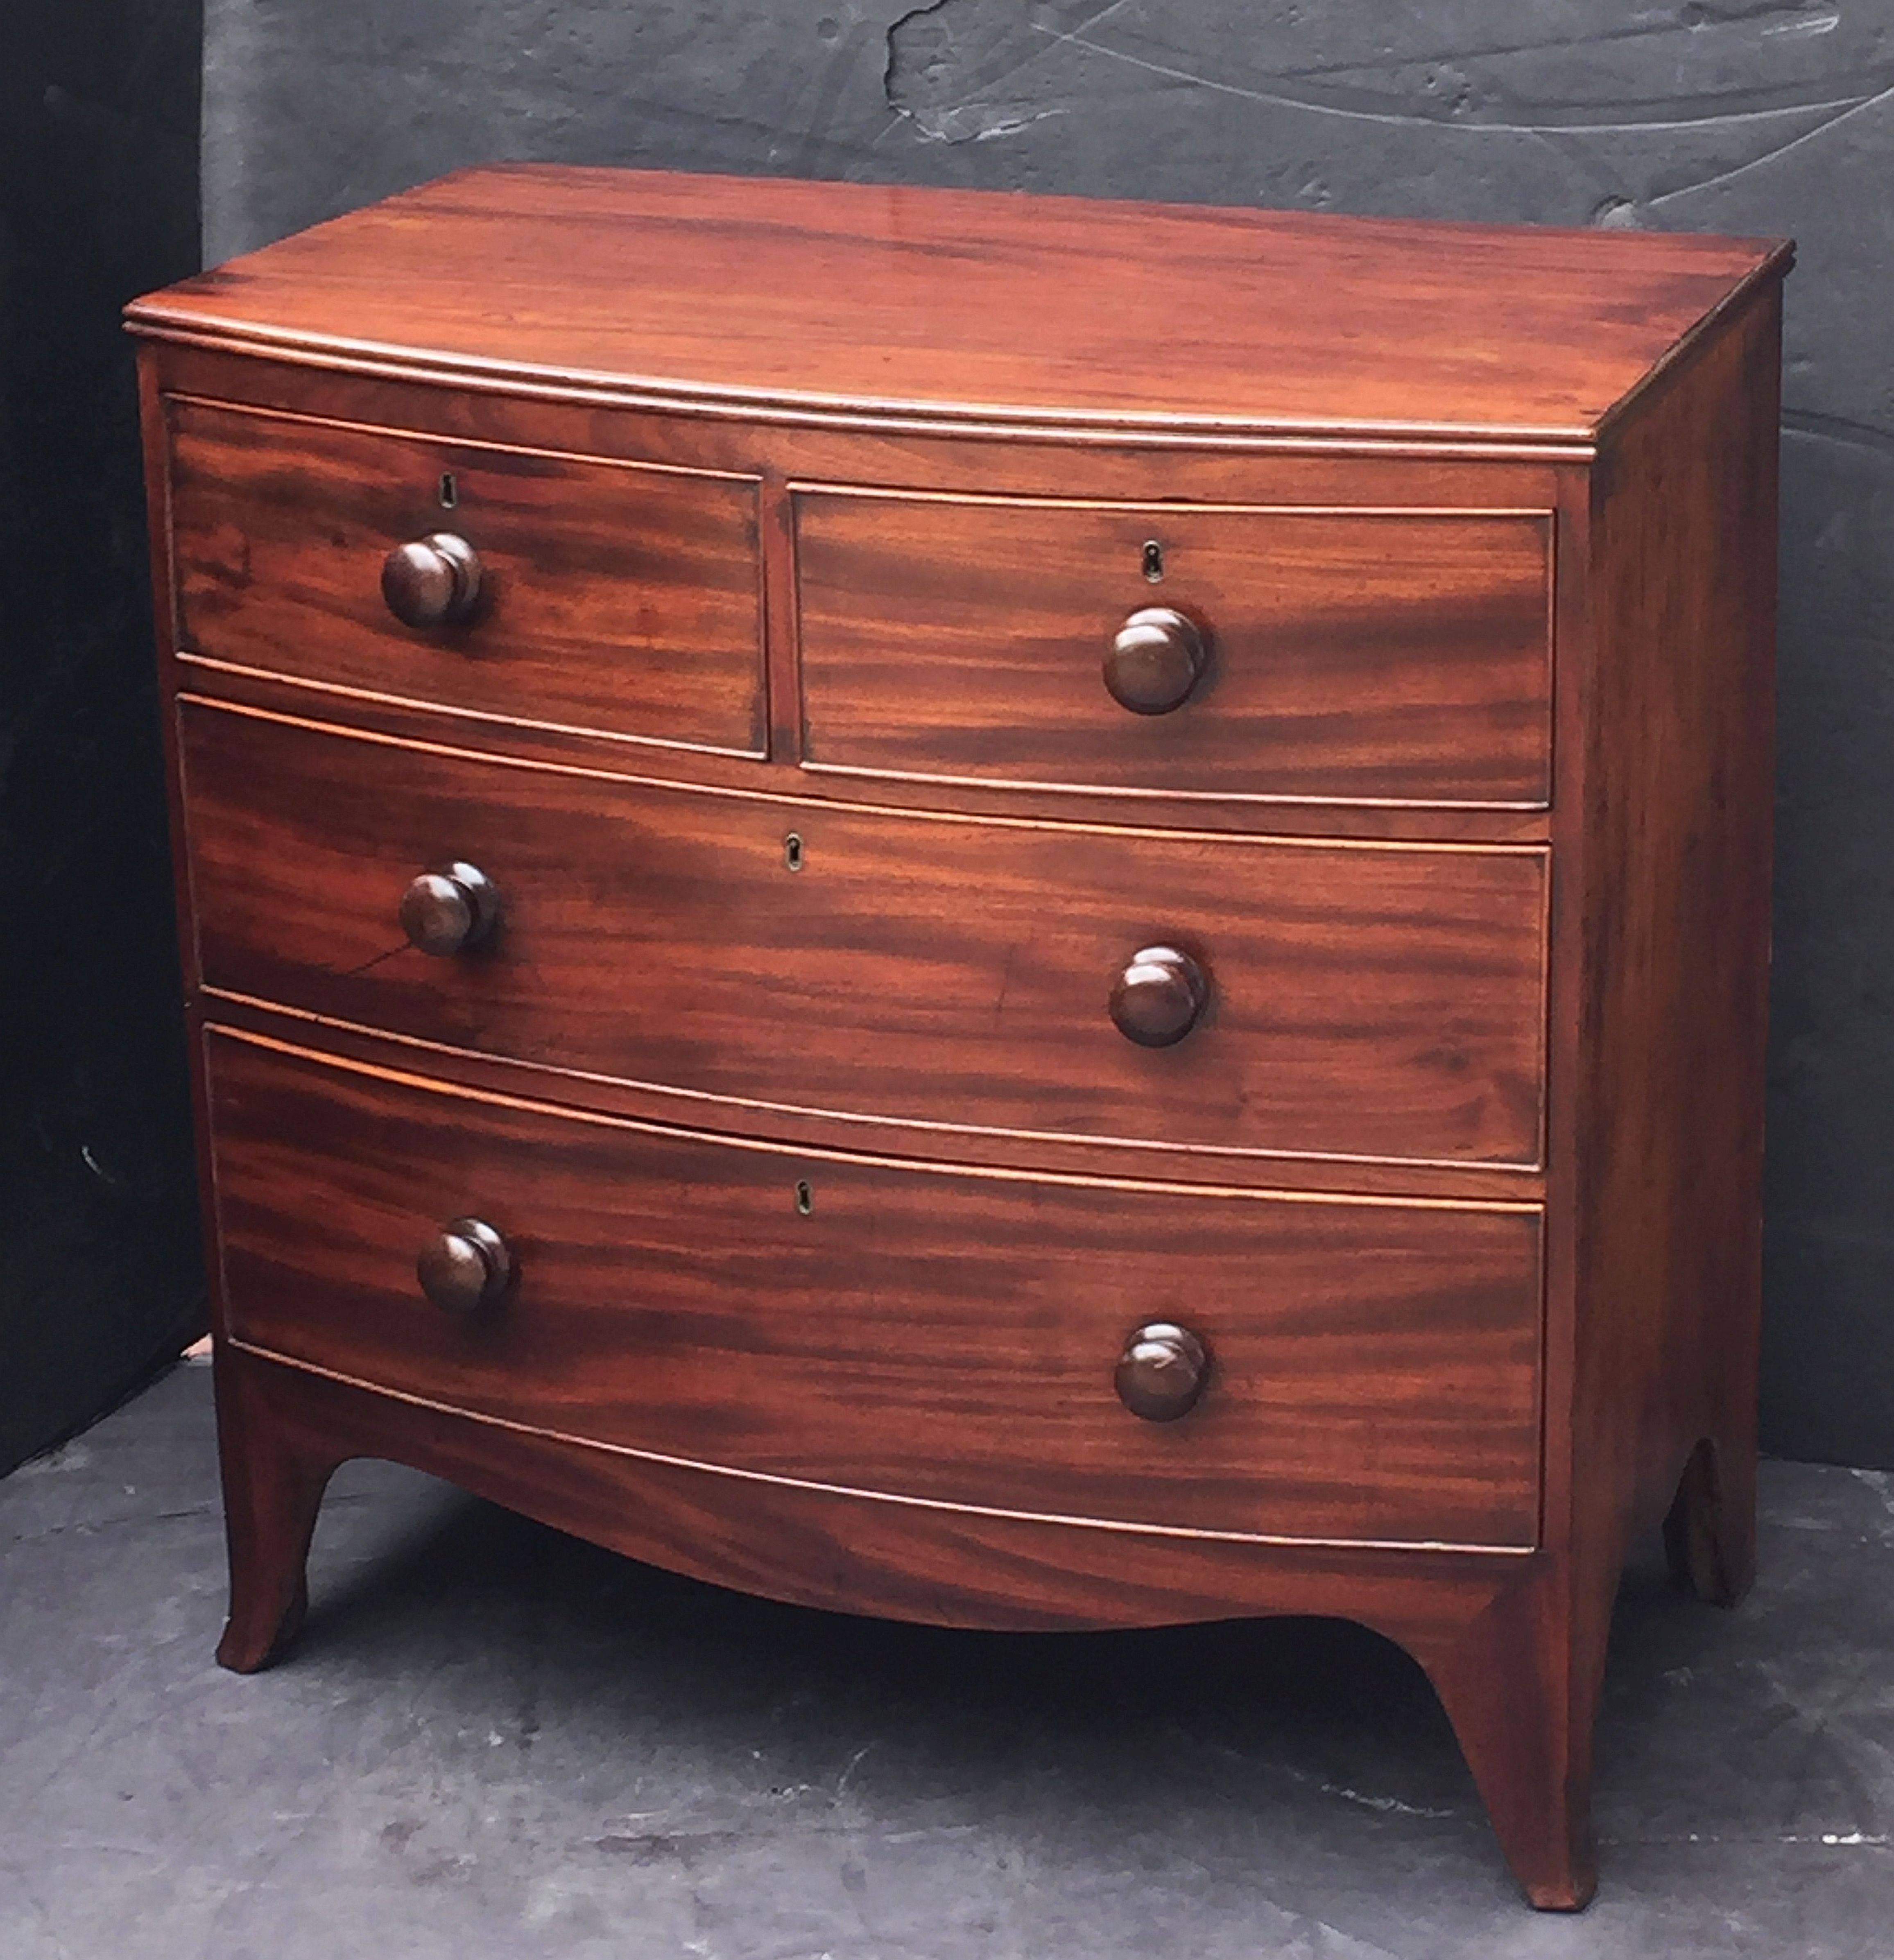 A handsome English bow-front chest of drawers of mahogany, featuring a bowed top over a frieze of two small beaded drawers and two beaded long drawers, with knob pulls, and set upon a serpentine splayed foot base.
The drawers showing mahogany